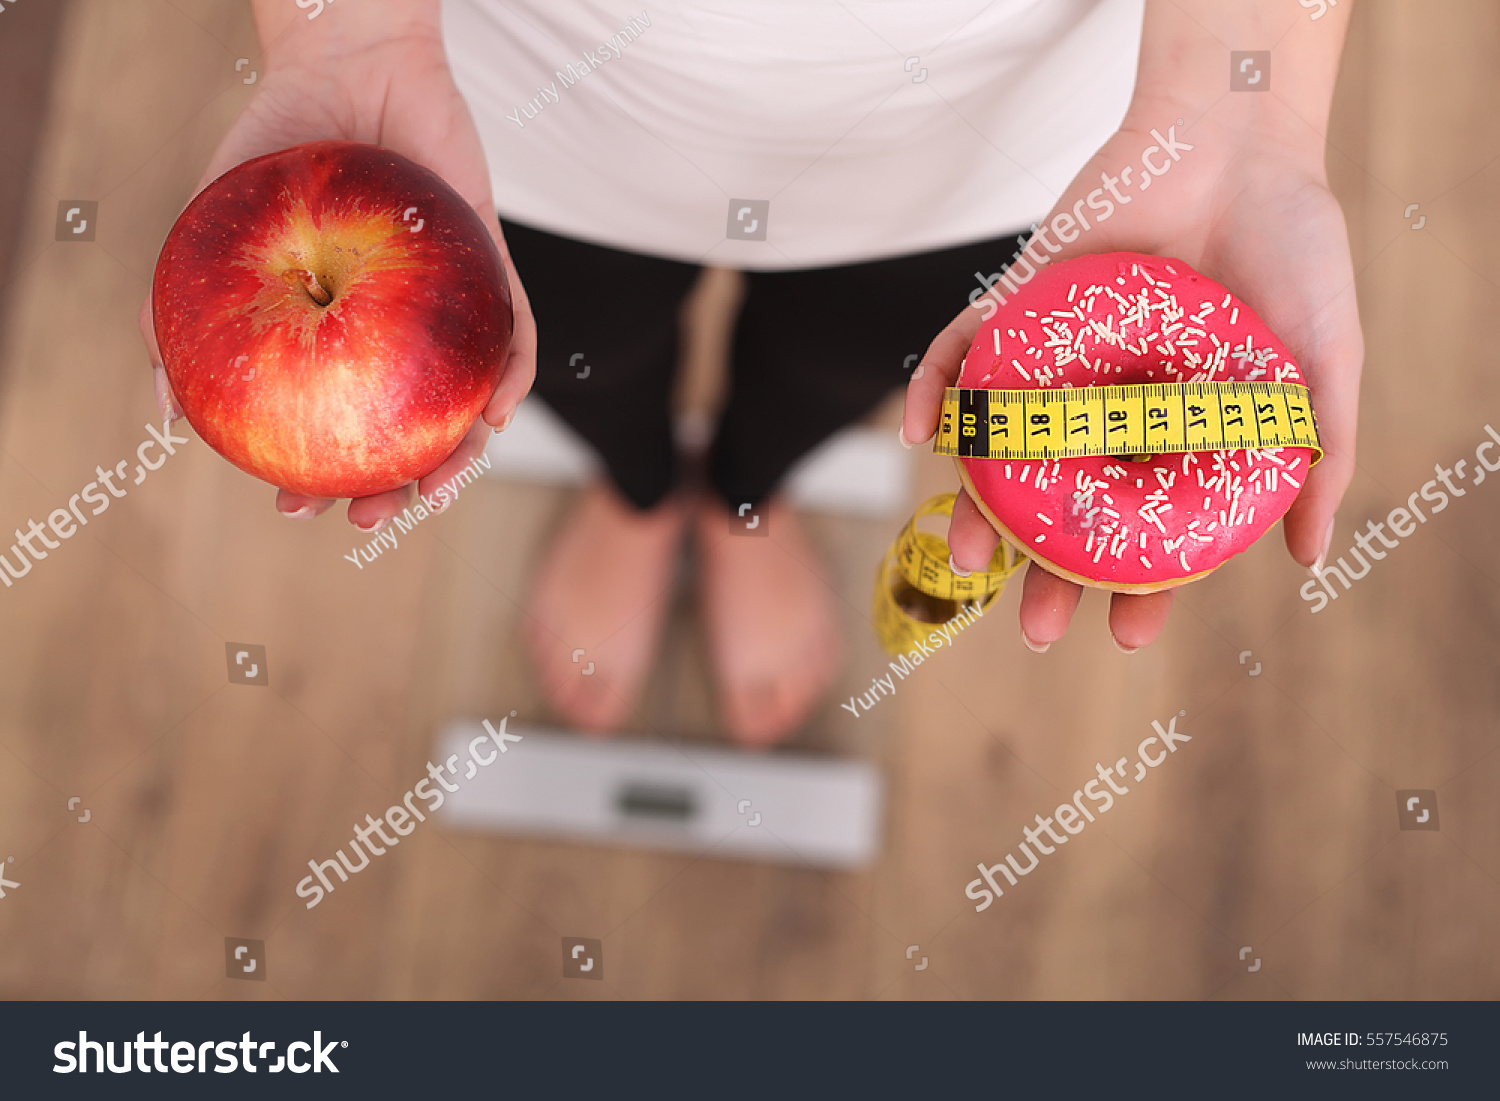 Close up view of woman making choice between apple and donut with blurred scales on background. Dieting concept #557546875